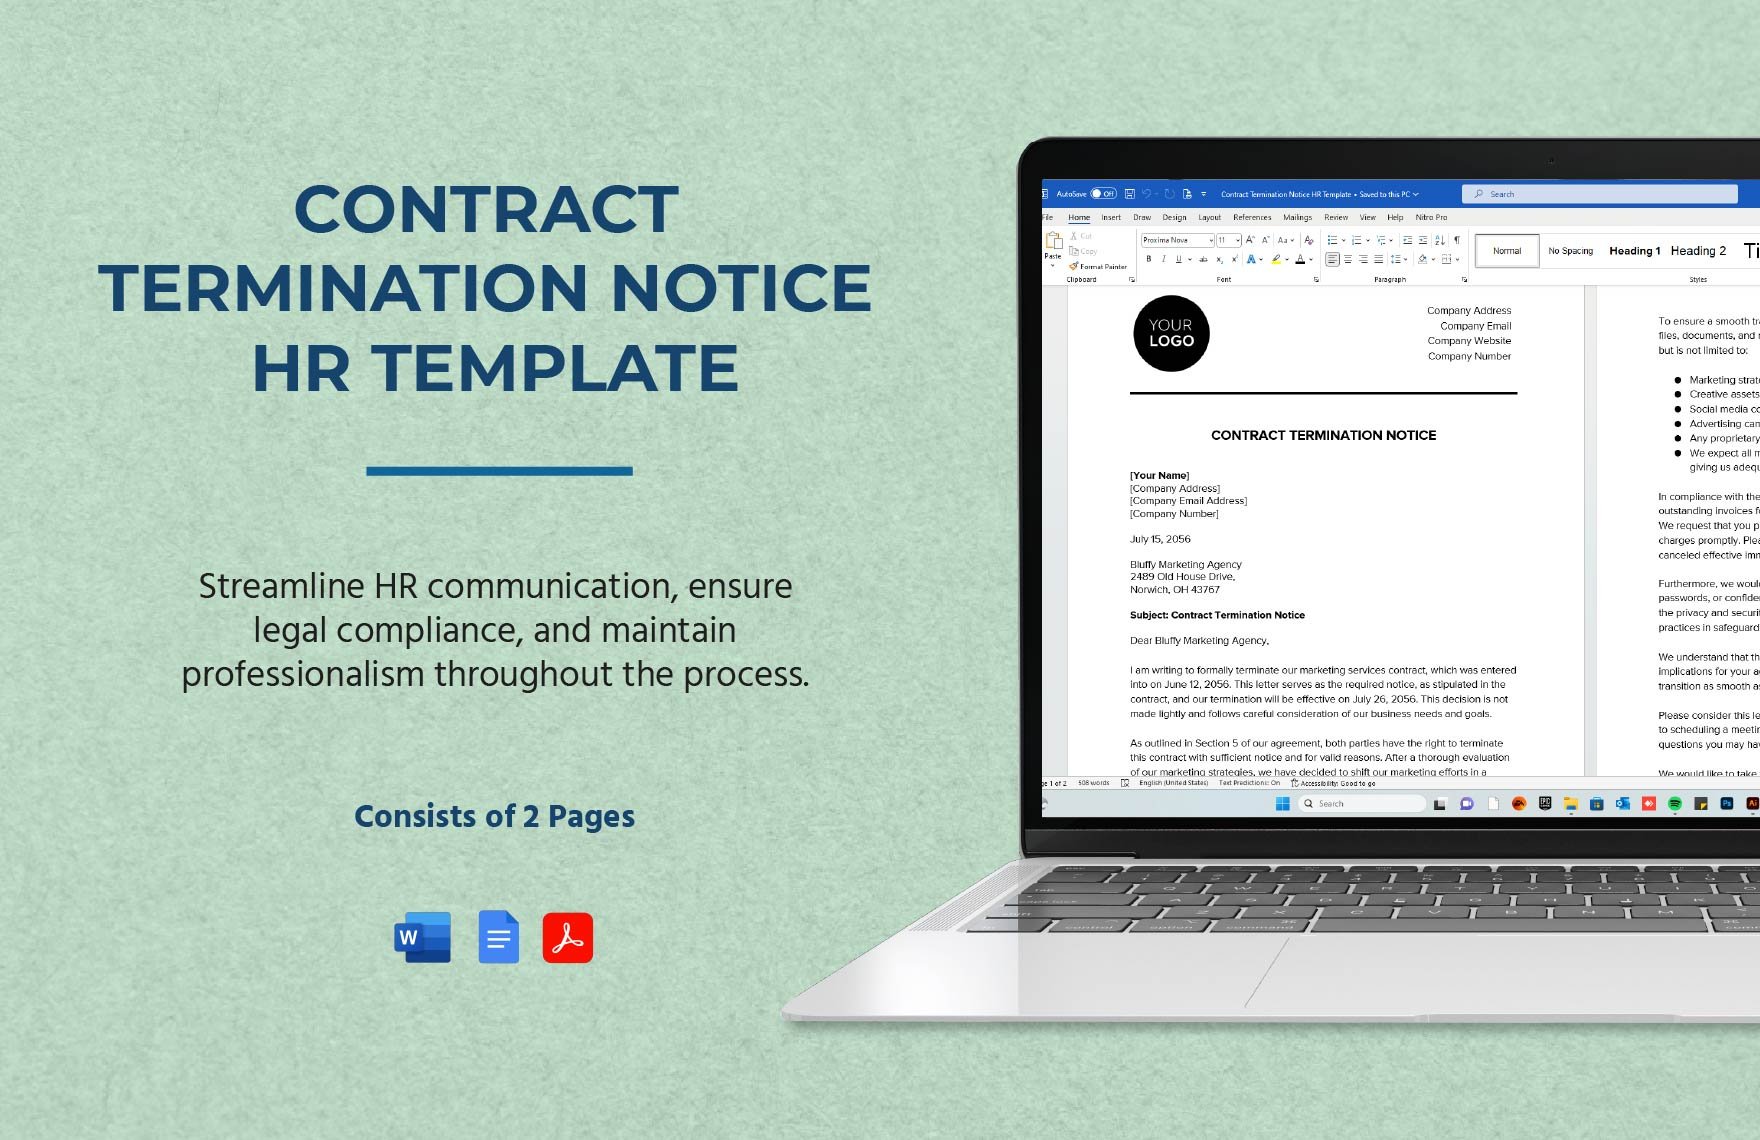 Contract Termination Notice HR Template